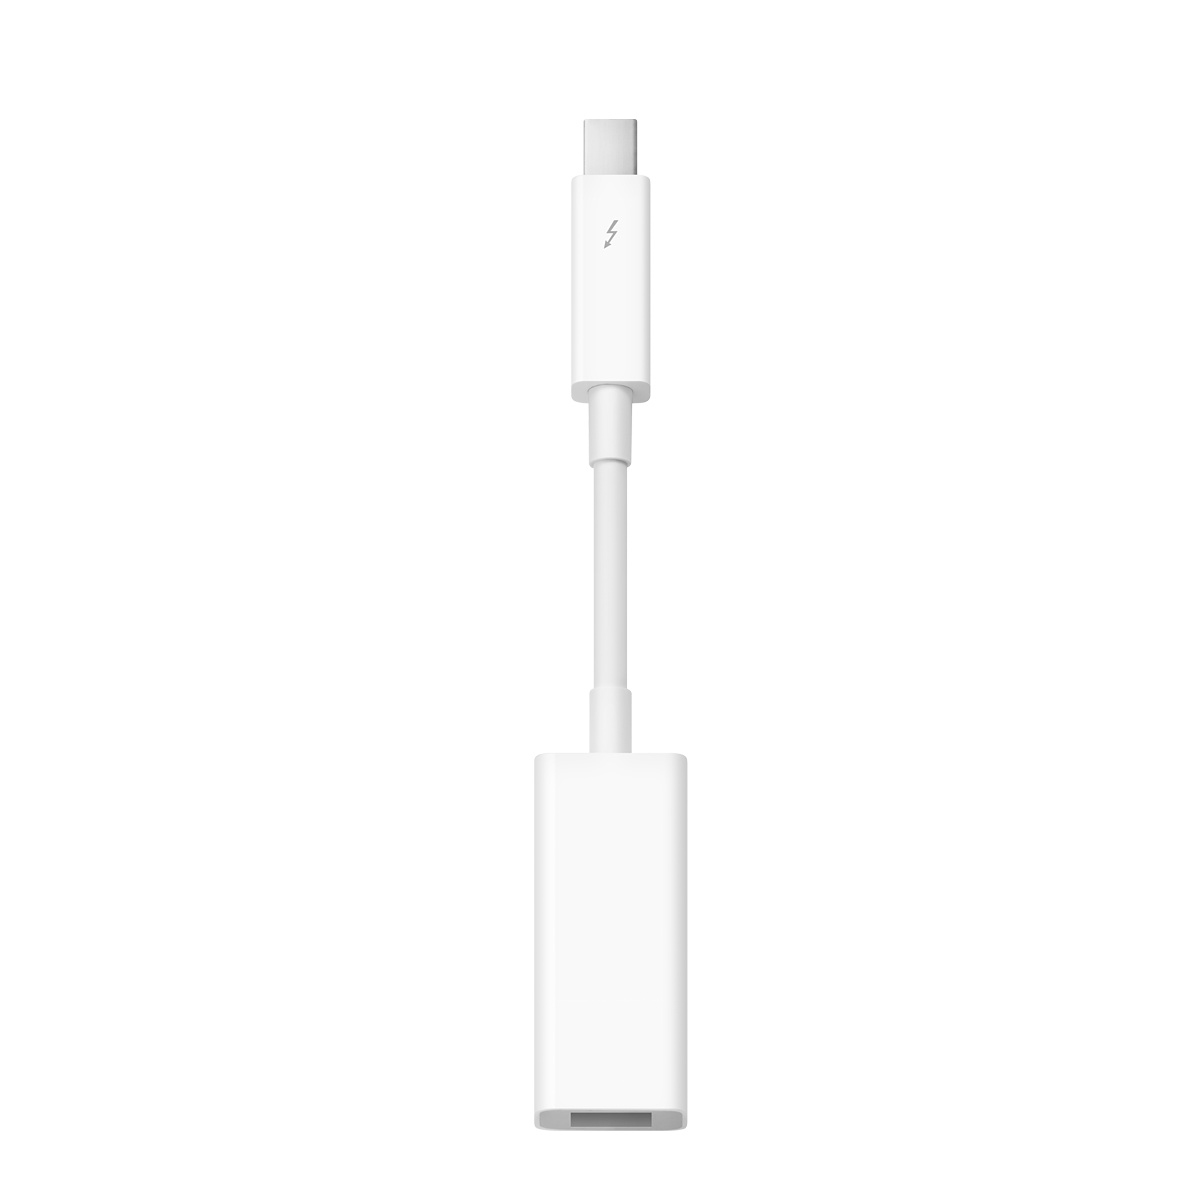  FN Thunderbolt to FireWire Adapter